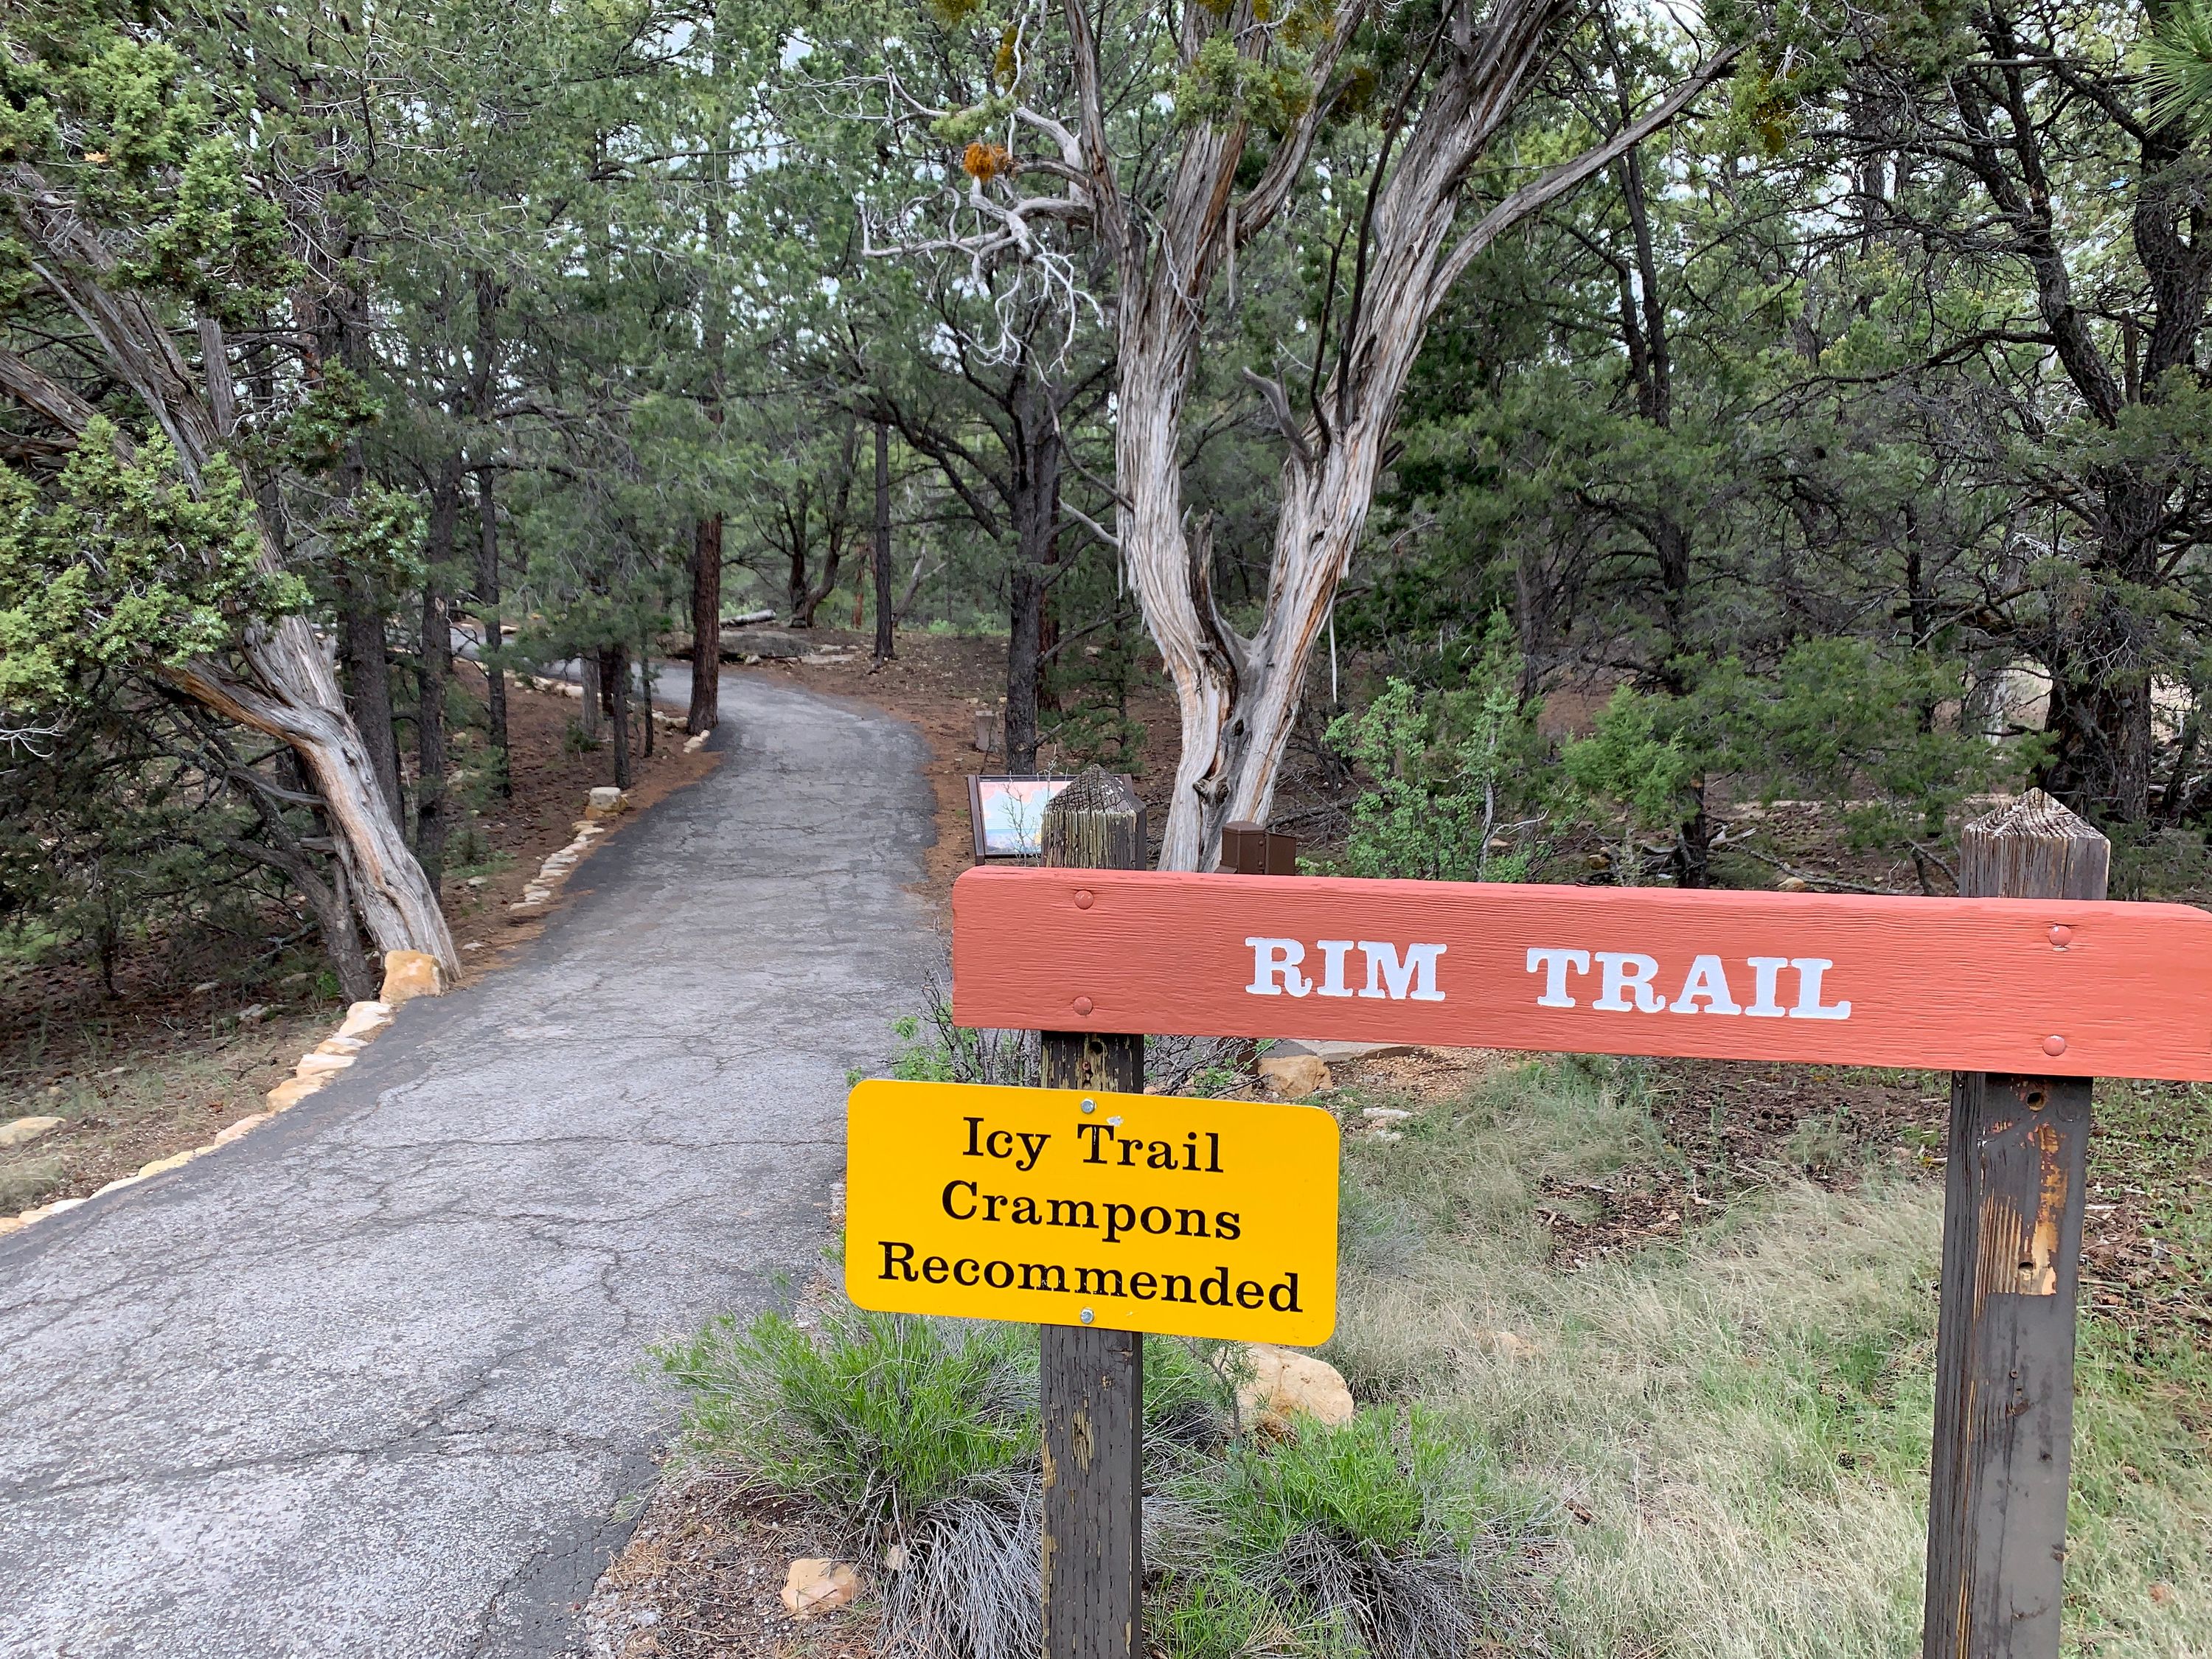 An entrance to the Rim Trail near a Visitor’s Center at the Grand Canyon